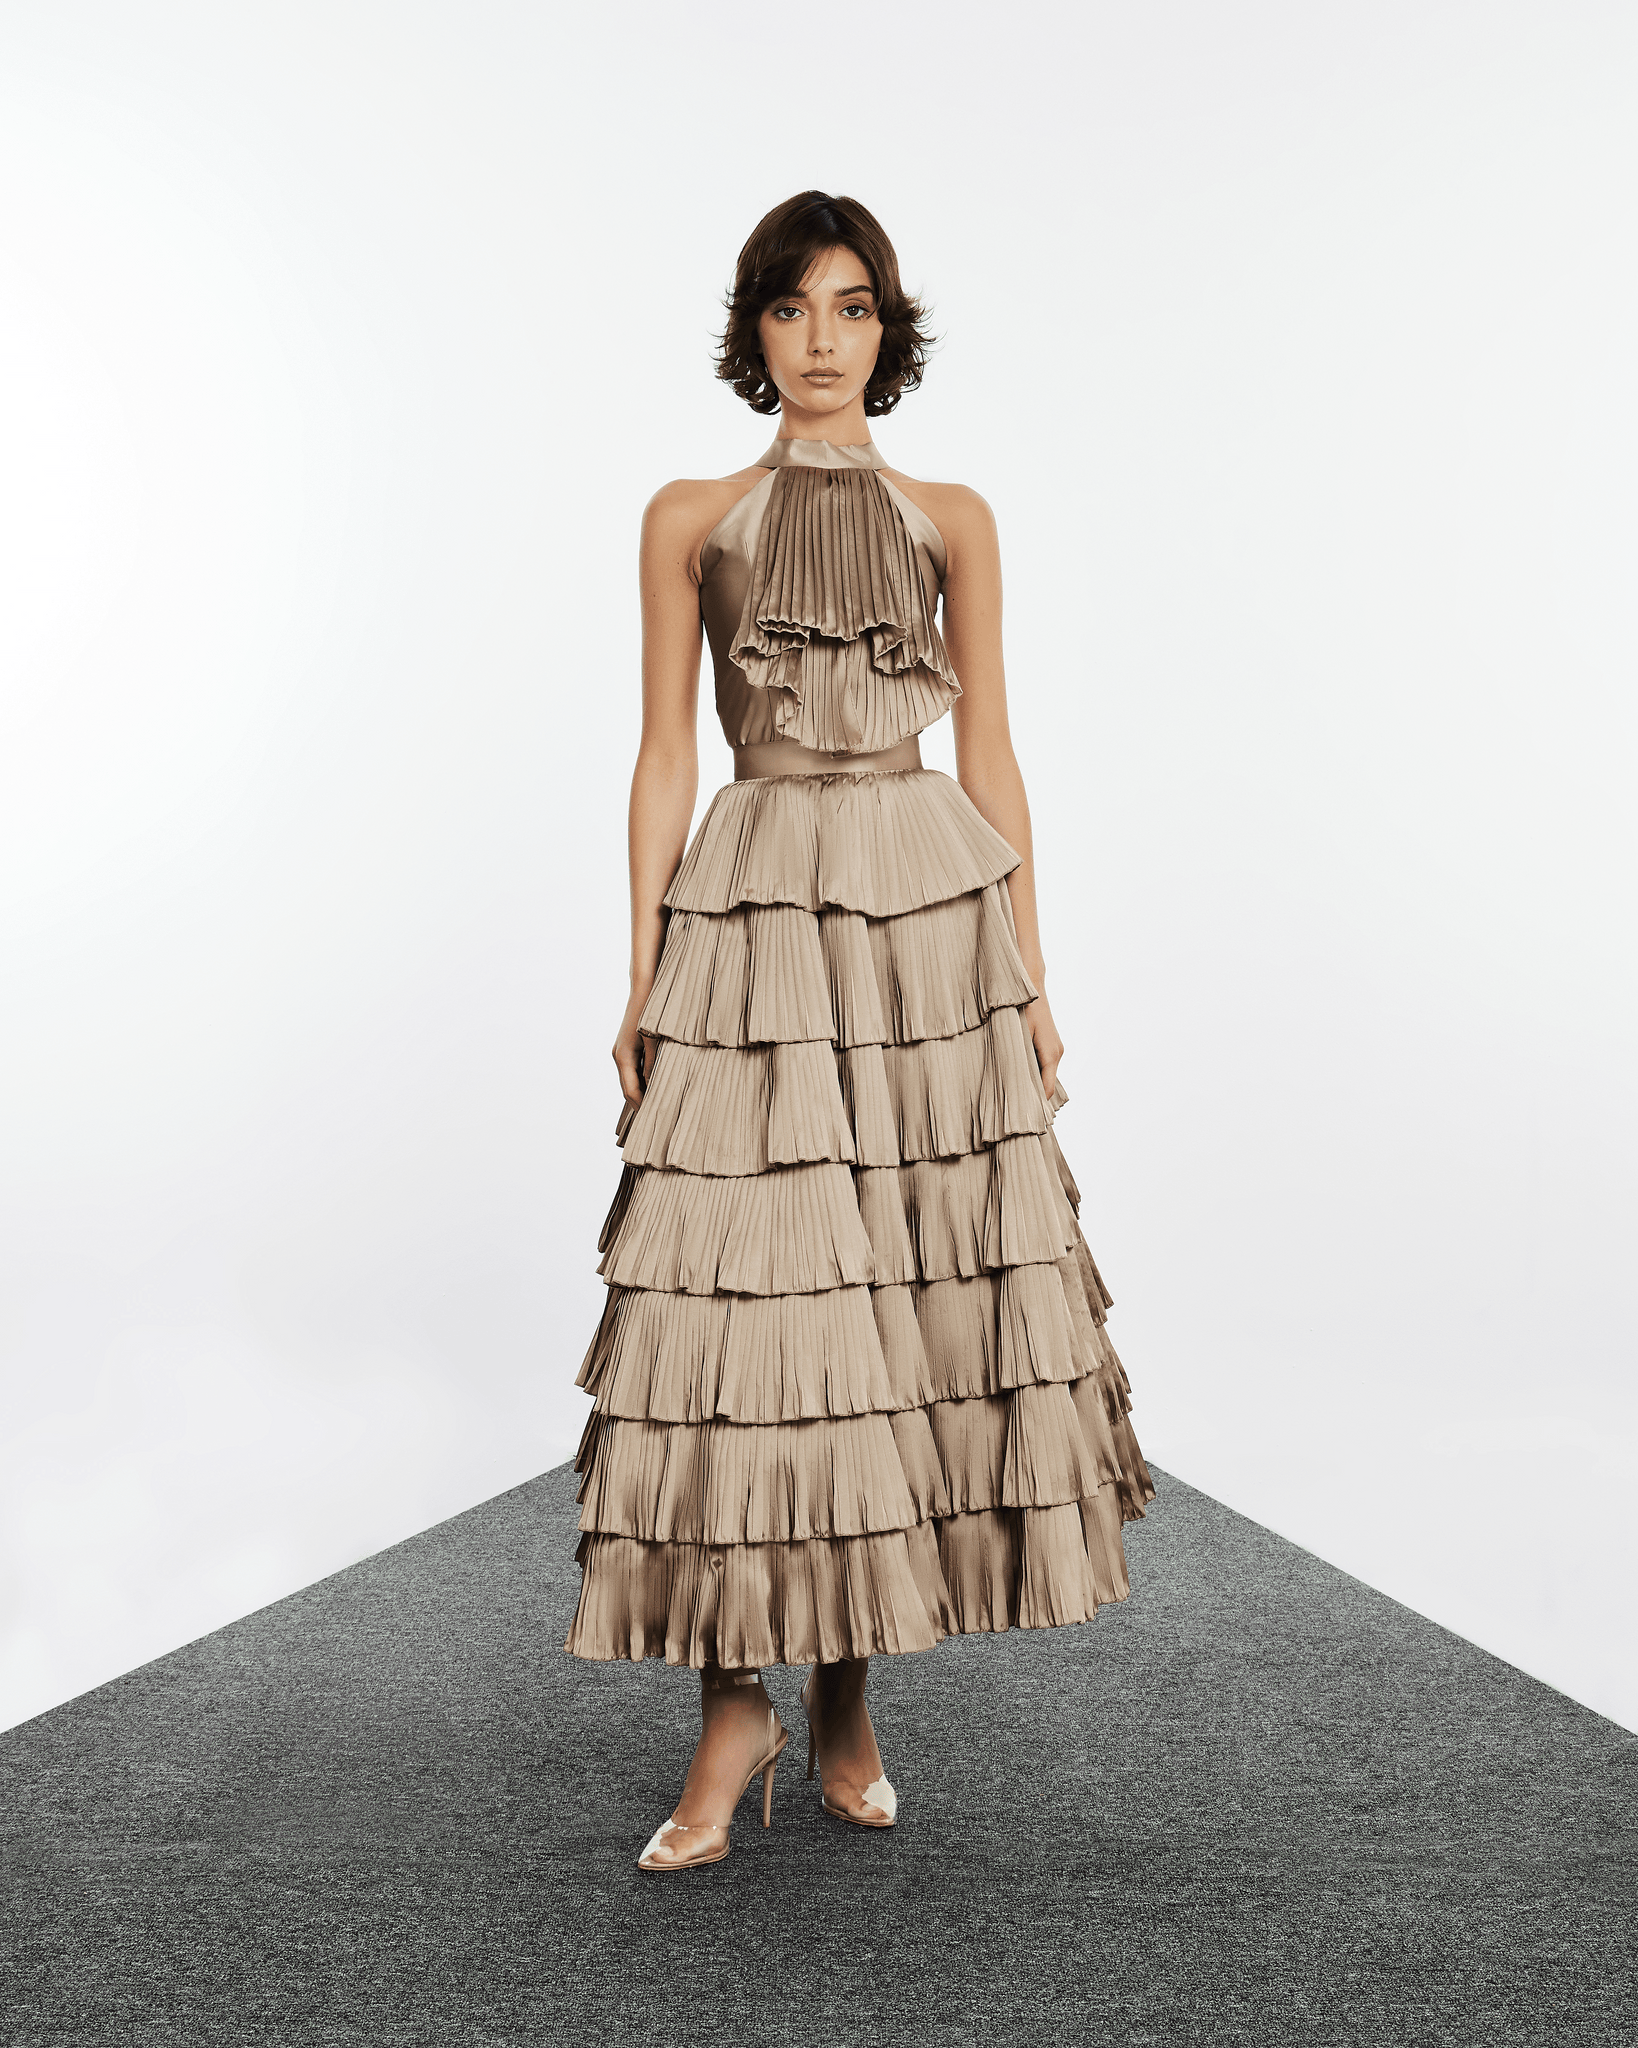 PLEATED RUFFLED SKIRT IN TAFFETA WITH HALTER NECK TOP